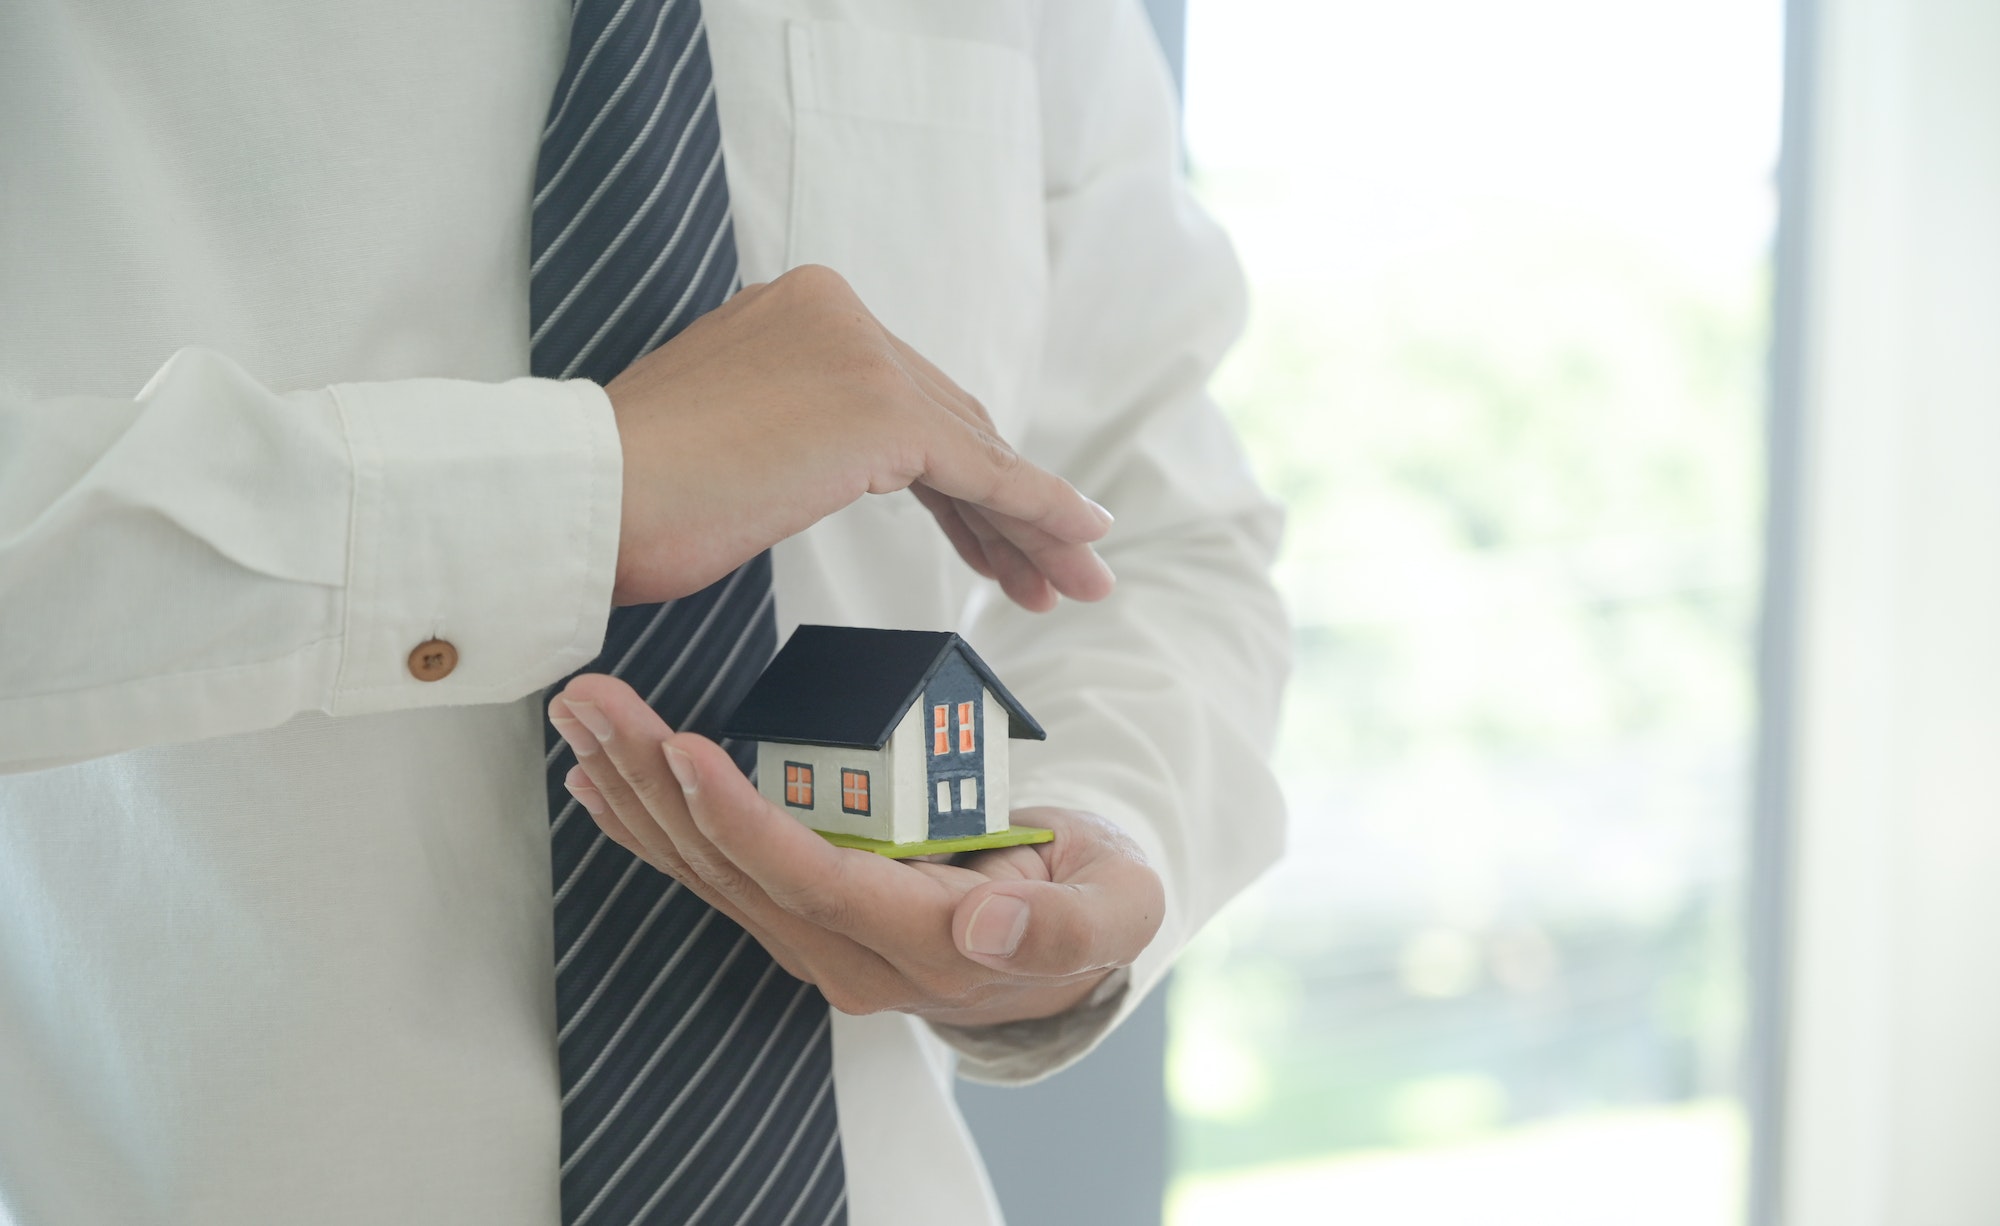 Insurance agent hold a house model in hand showing the symbol of home insurance.